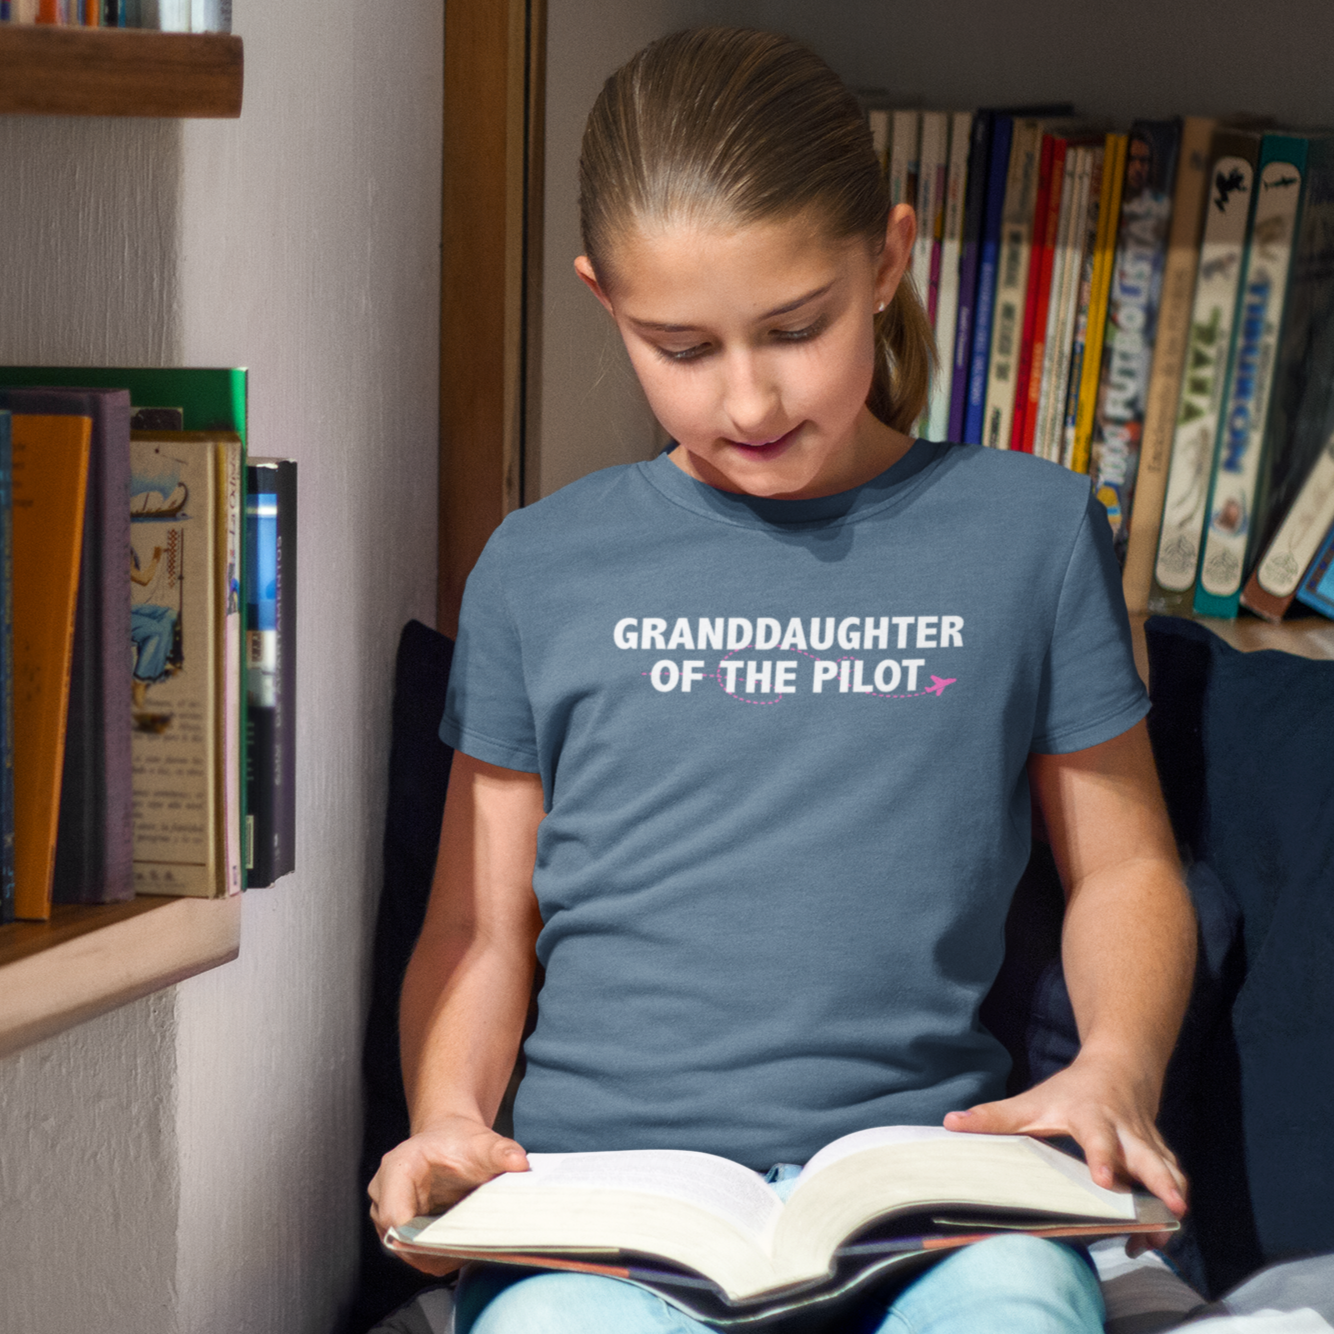 Granddaughter of the/a Pilot - Youth T-shirt